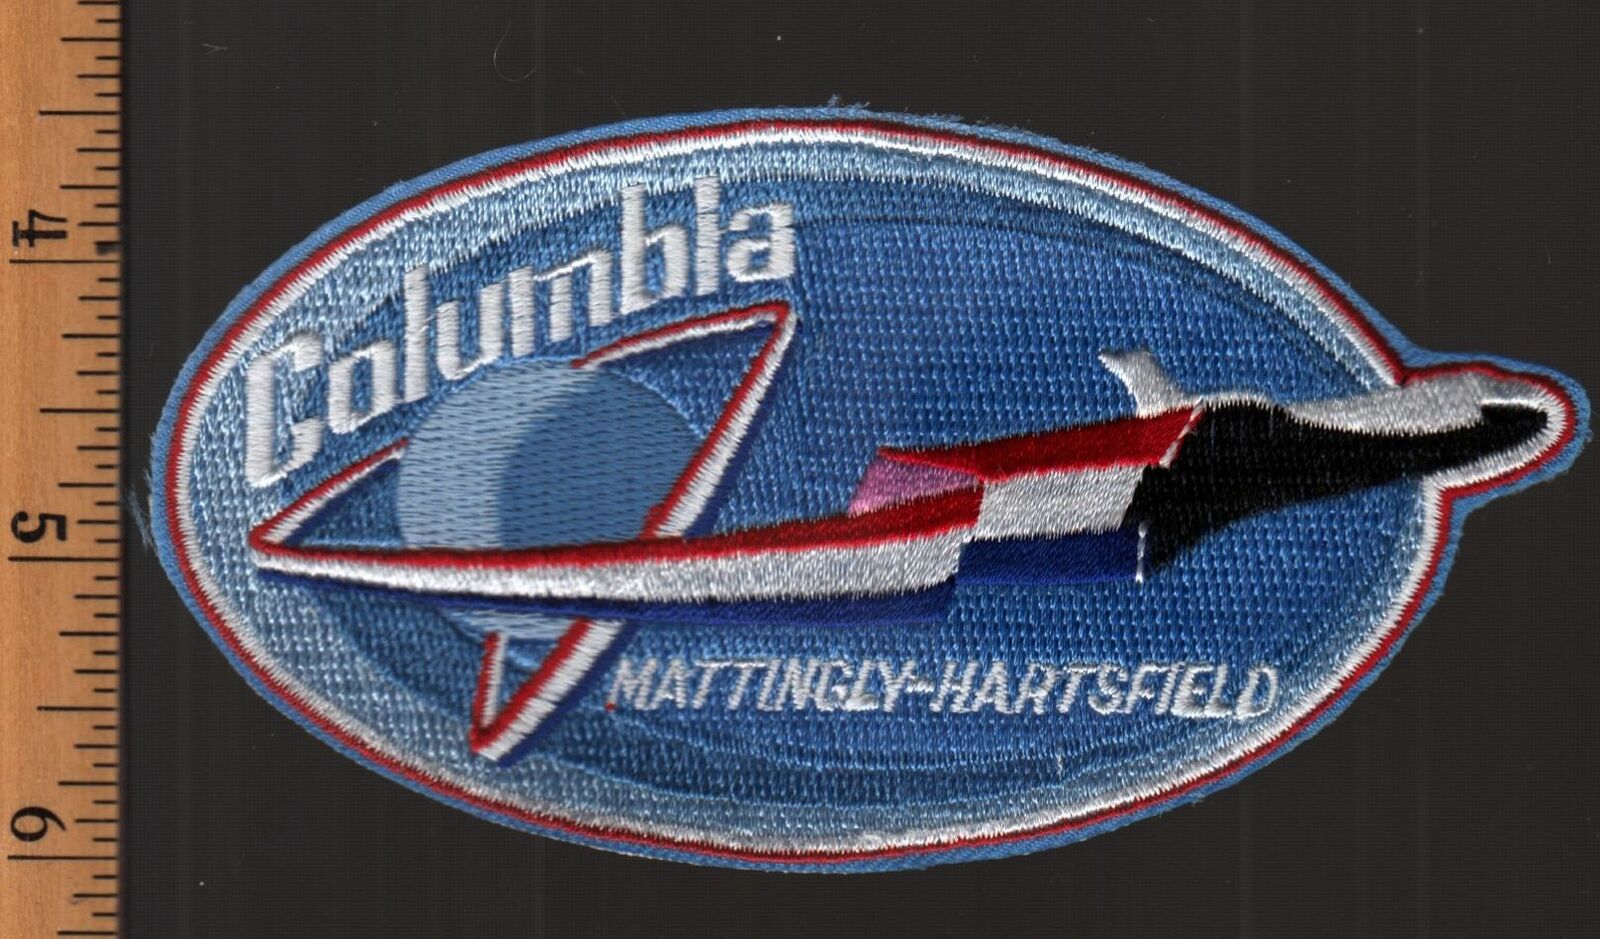 1982 Columbia STS-4 Space Shuttle embroidered patch Mattingly Hartsfield (A11